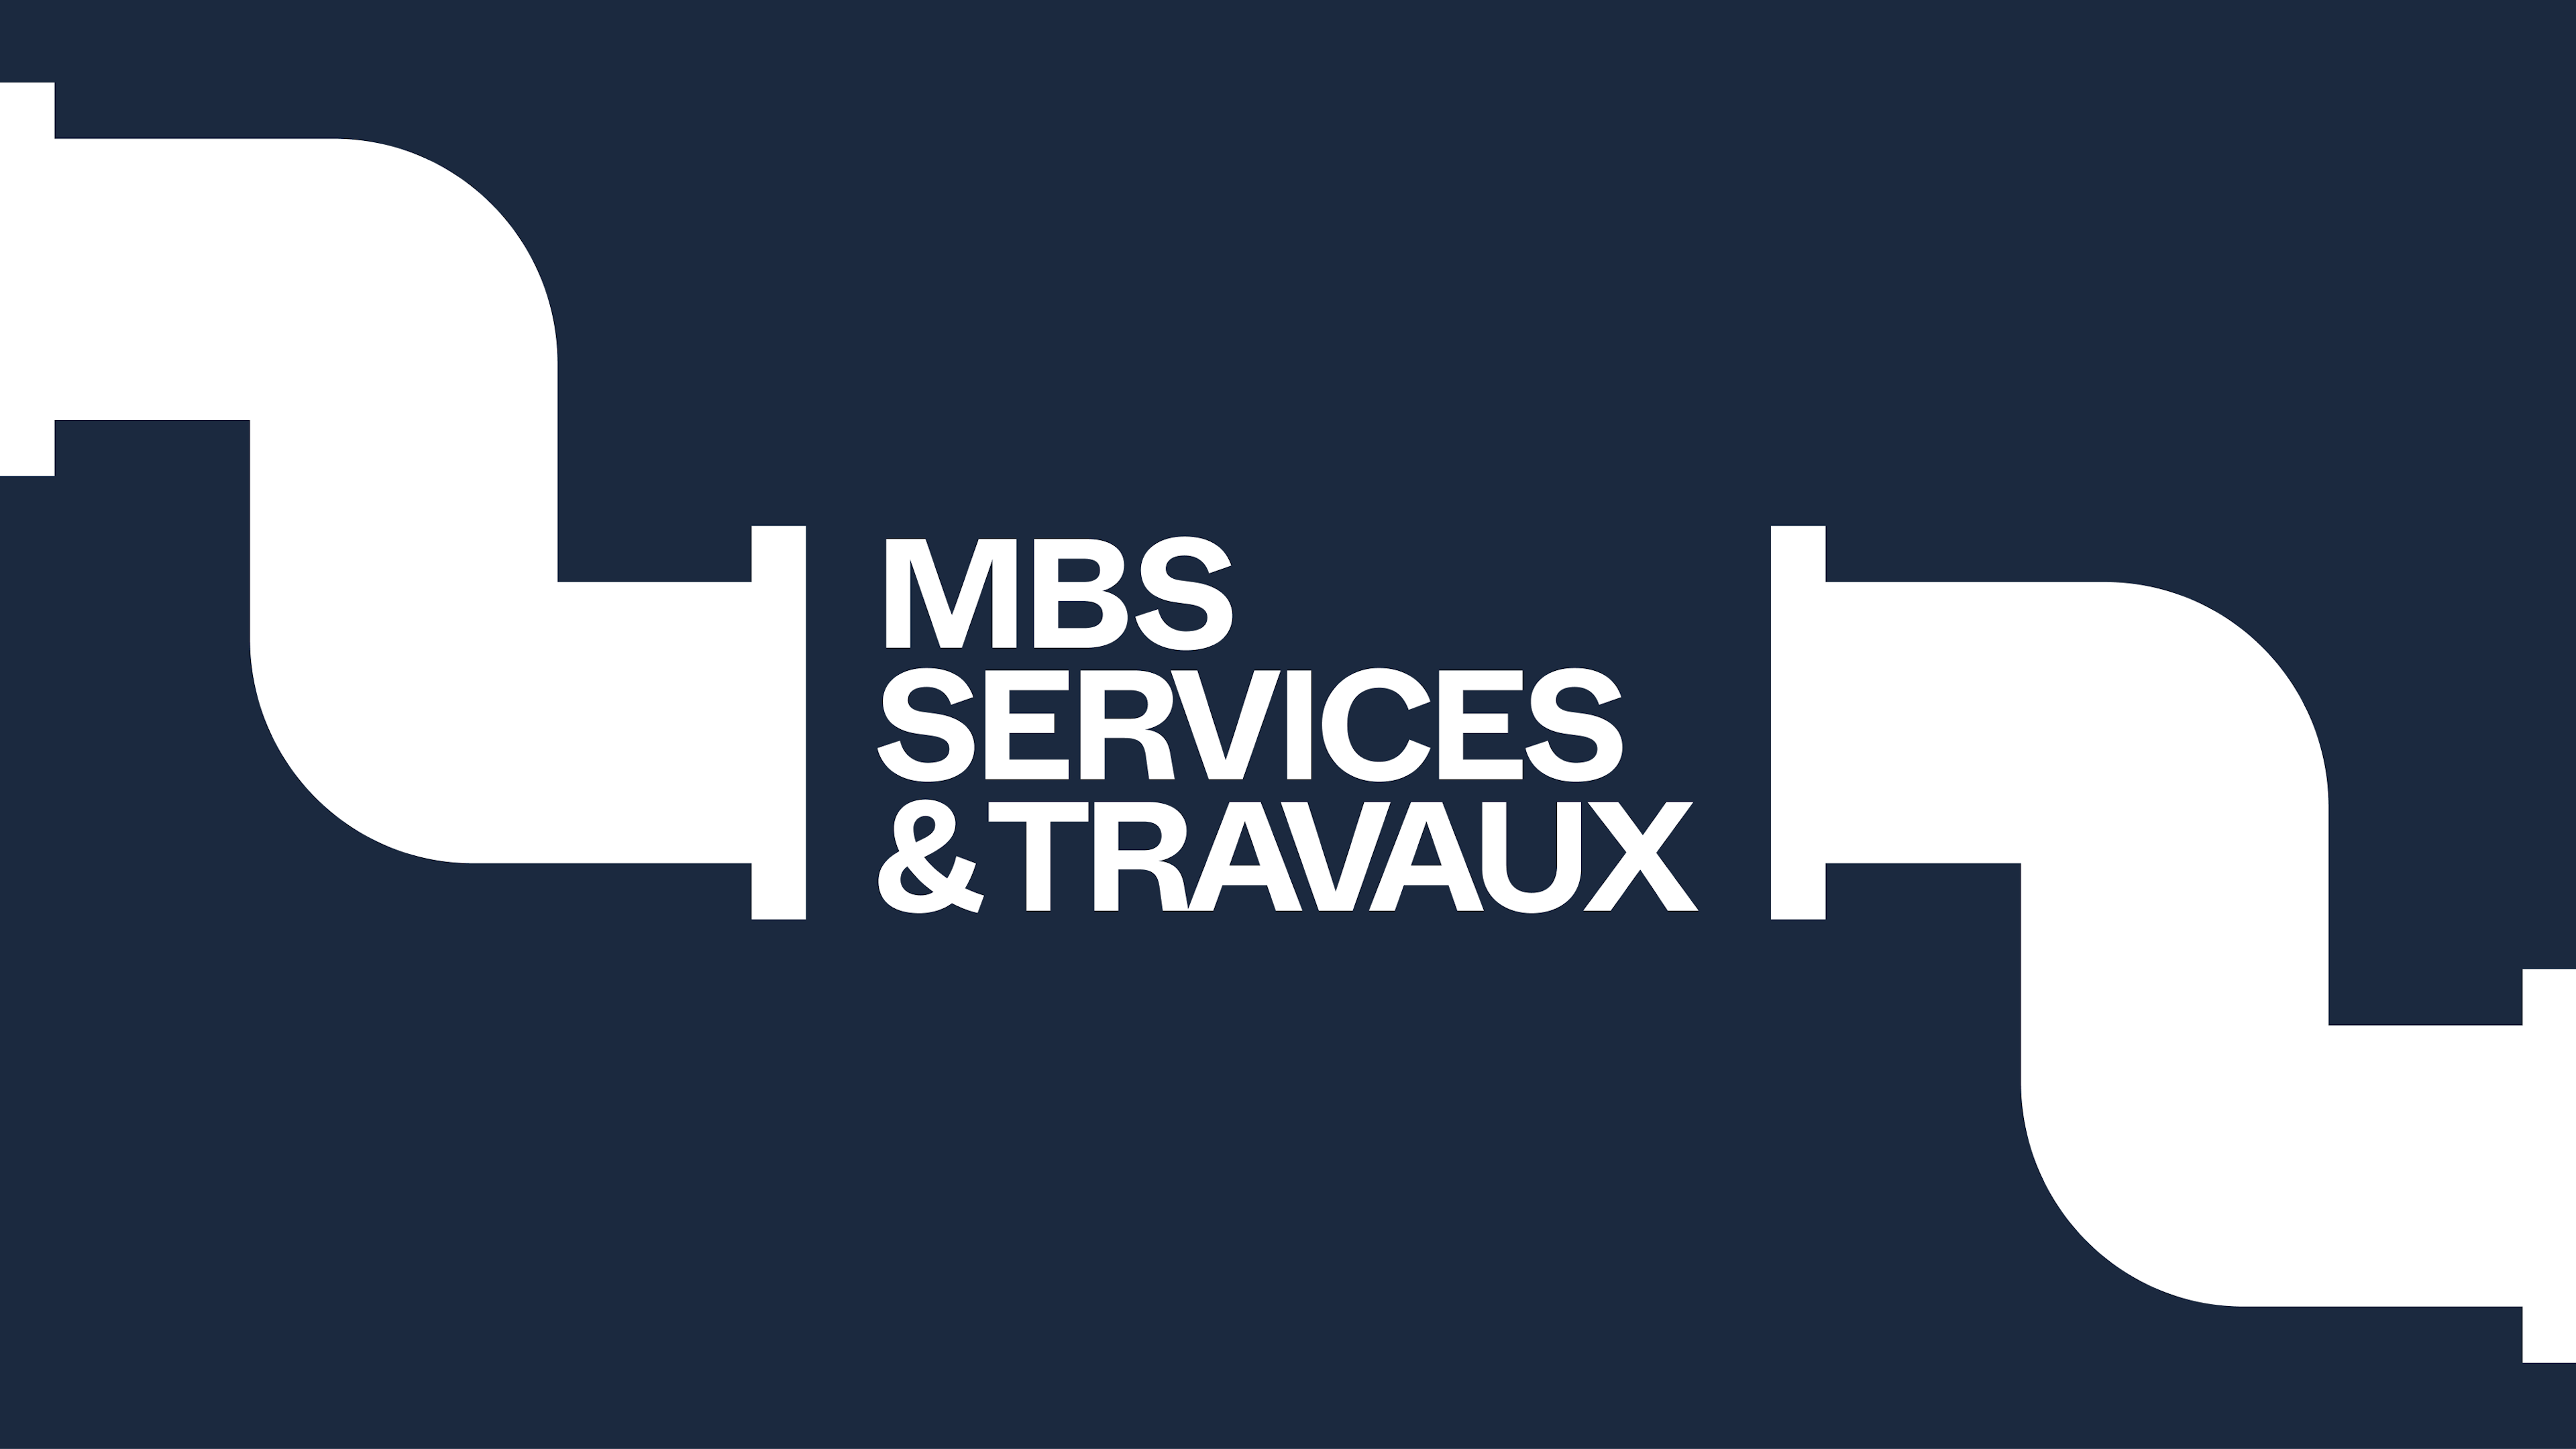 MBS Services & Travaux